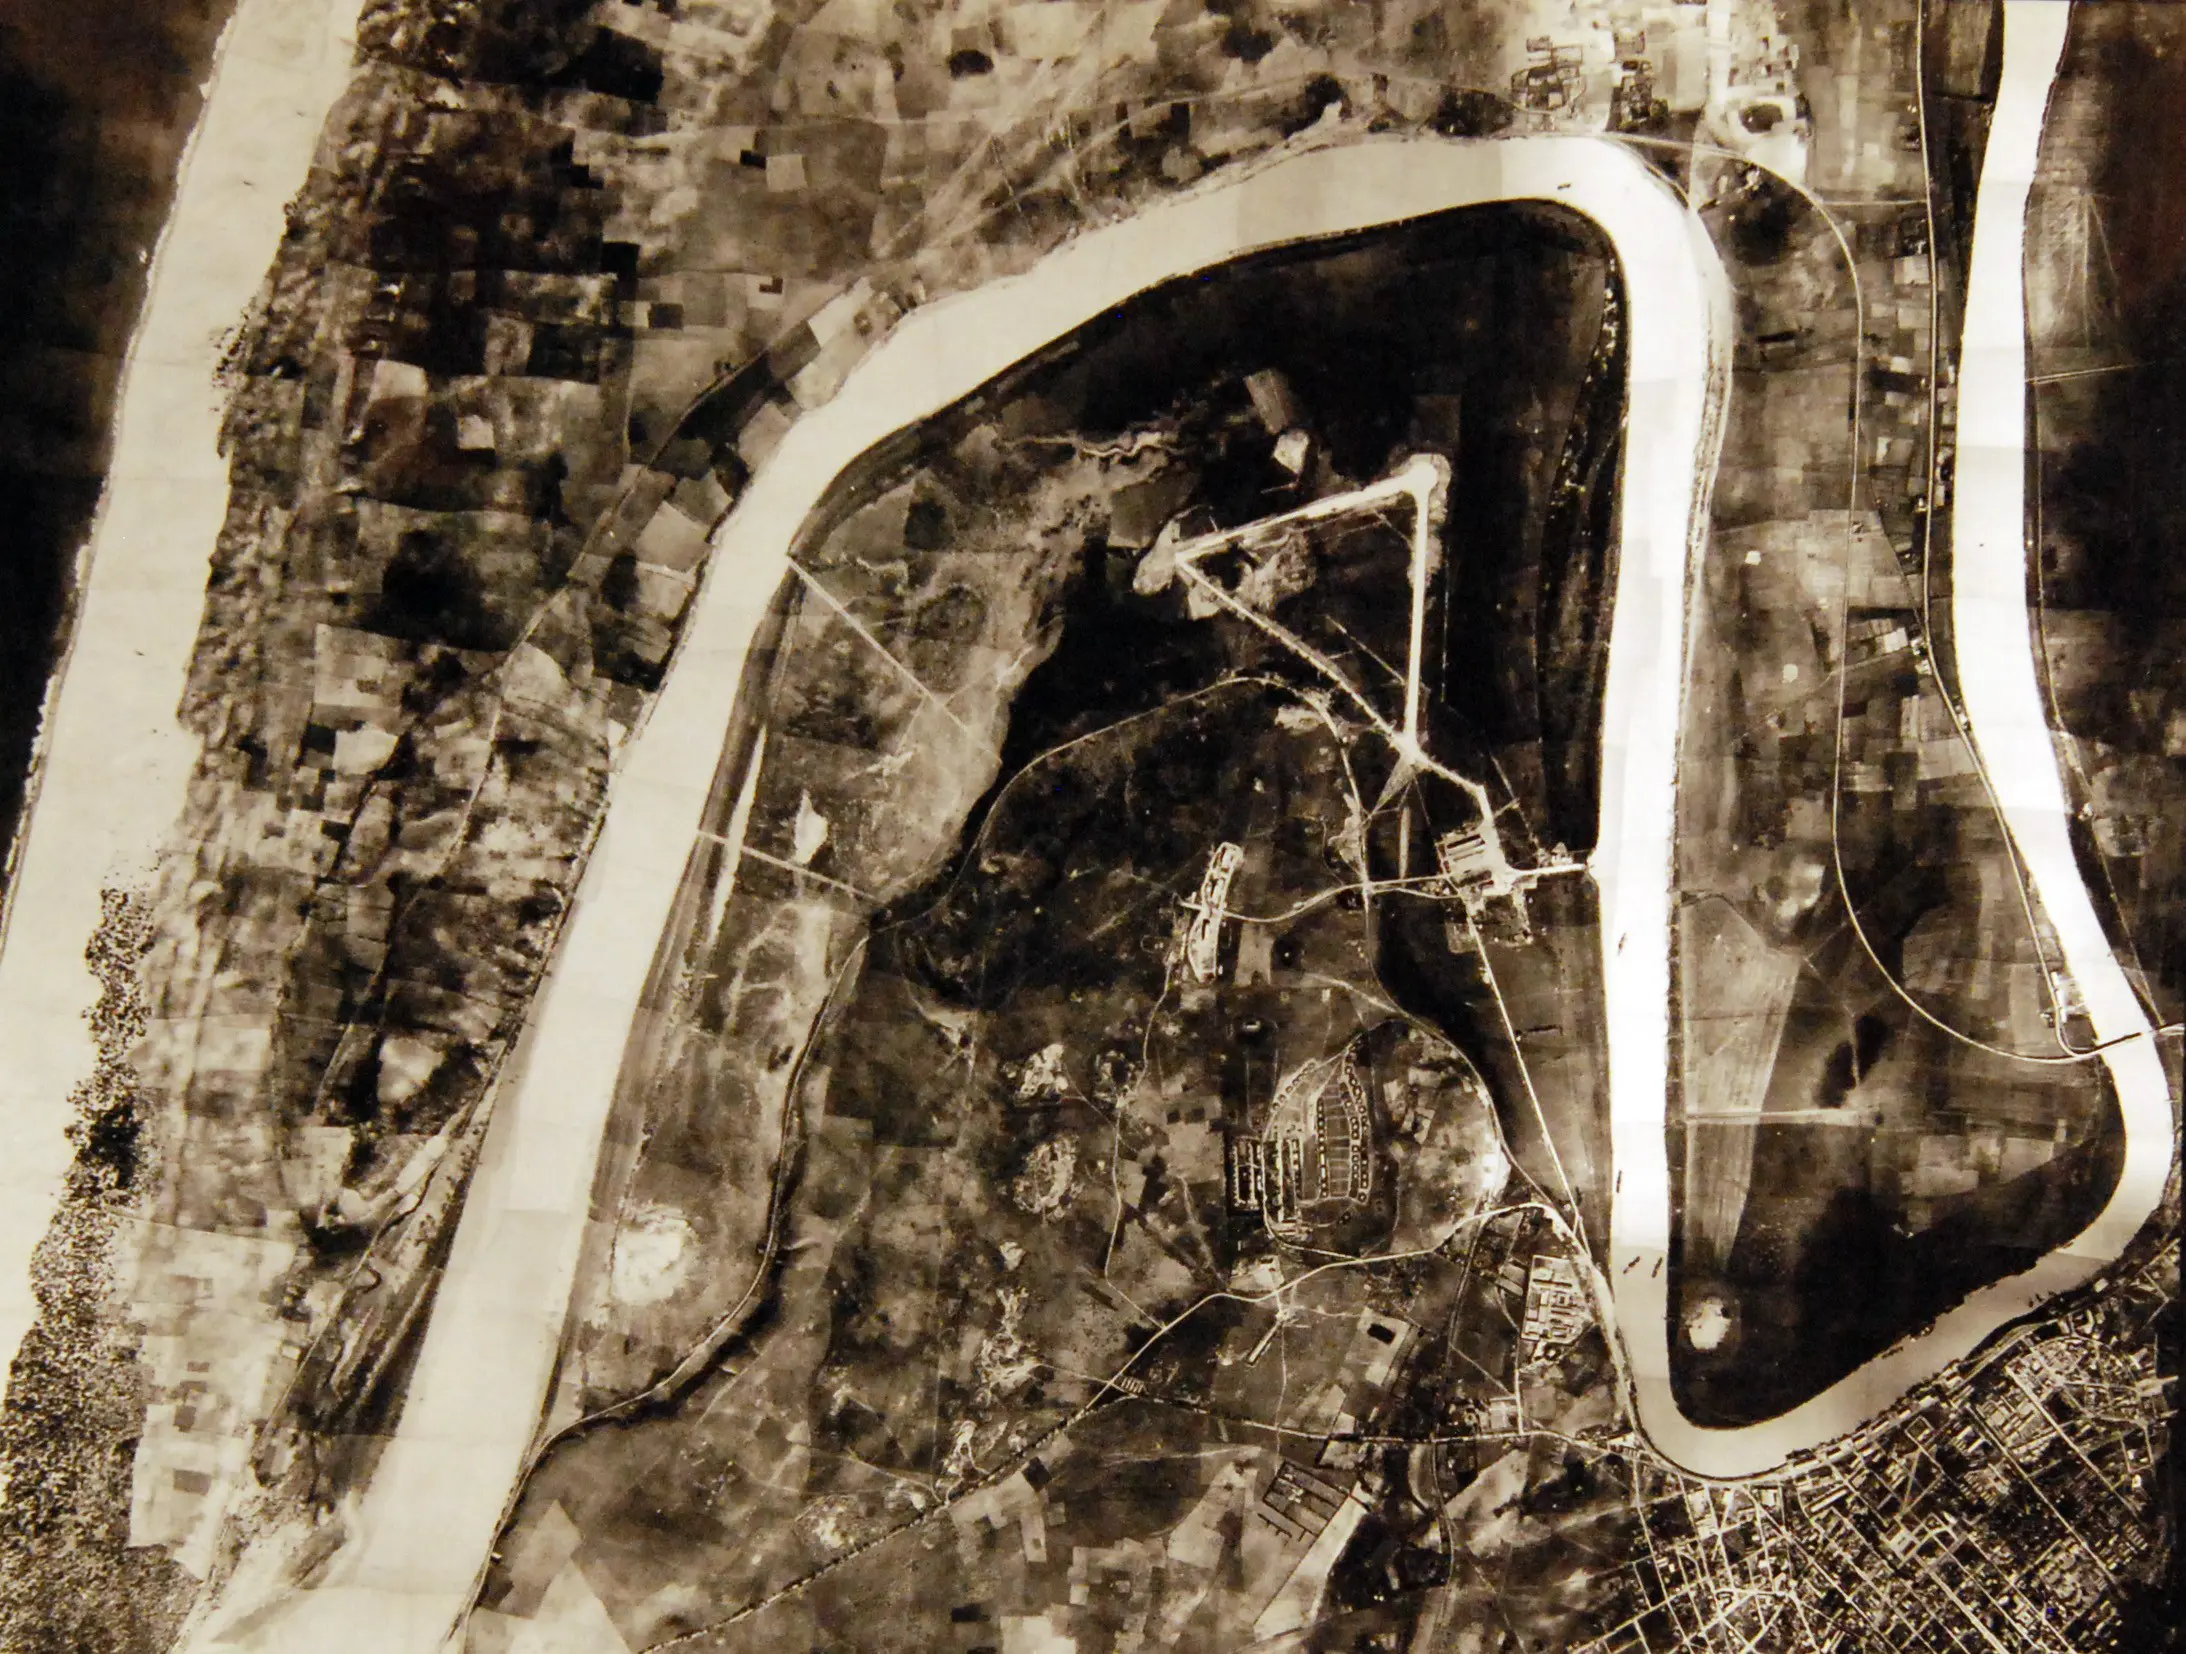 An aerial black and white photograph, showing a snaking river surrounded by rural roads with a city grid in the bottom right.